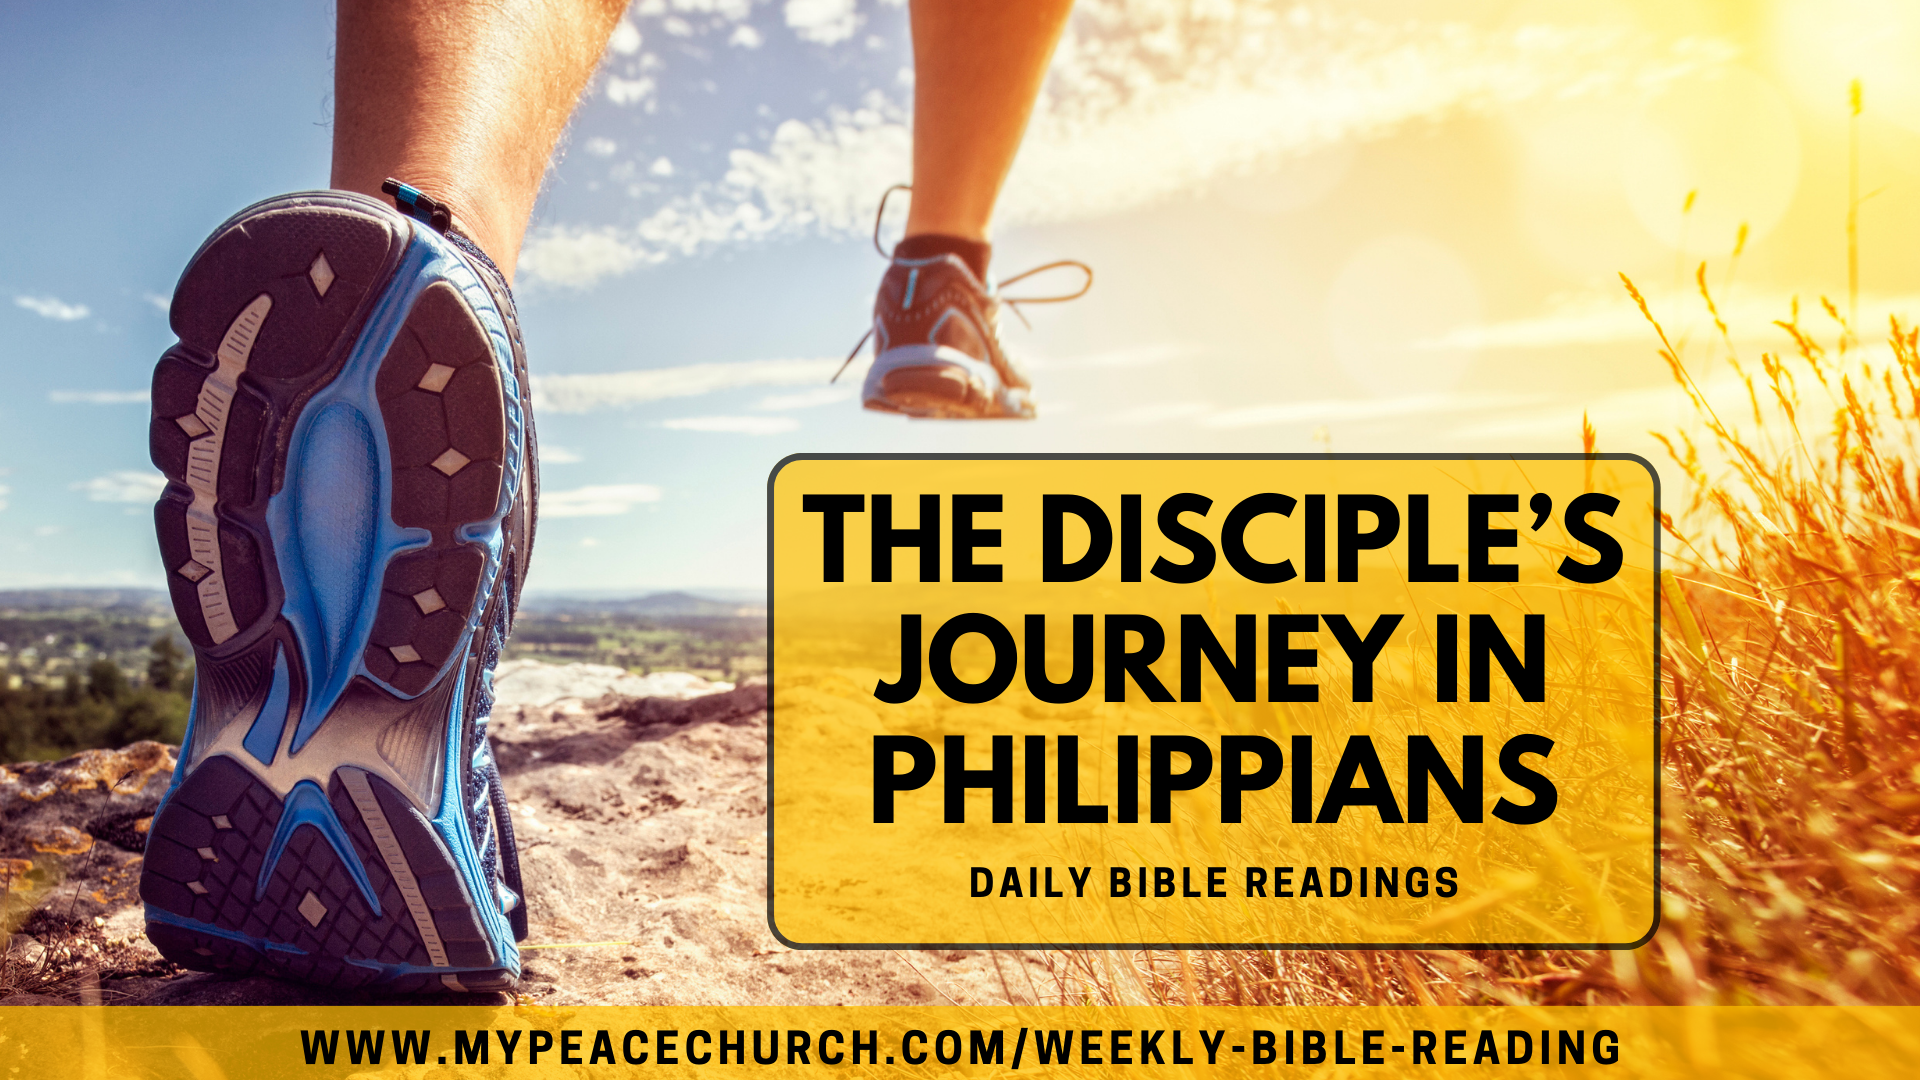 Copy of Copy of The Disciple’s Journey in Philippians.png